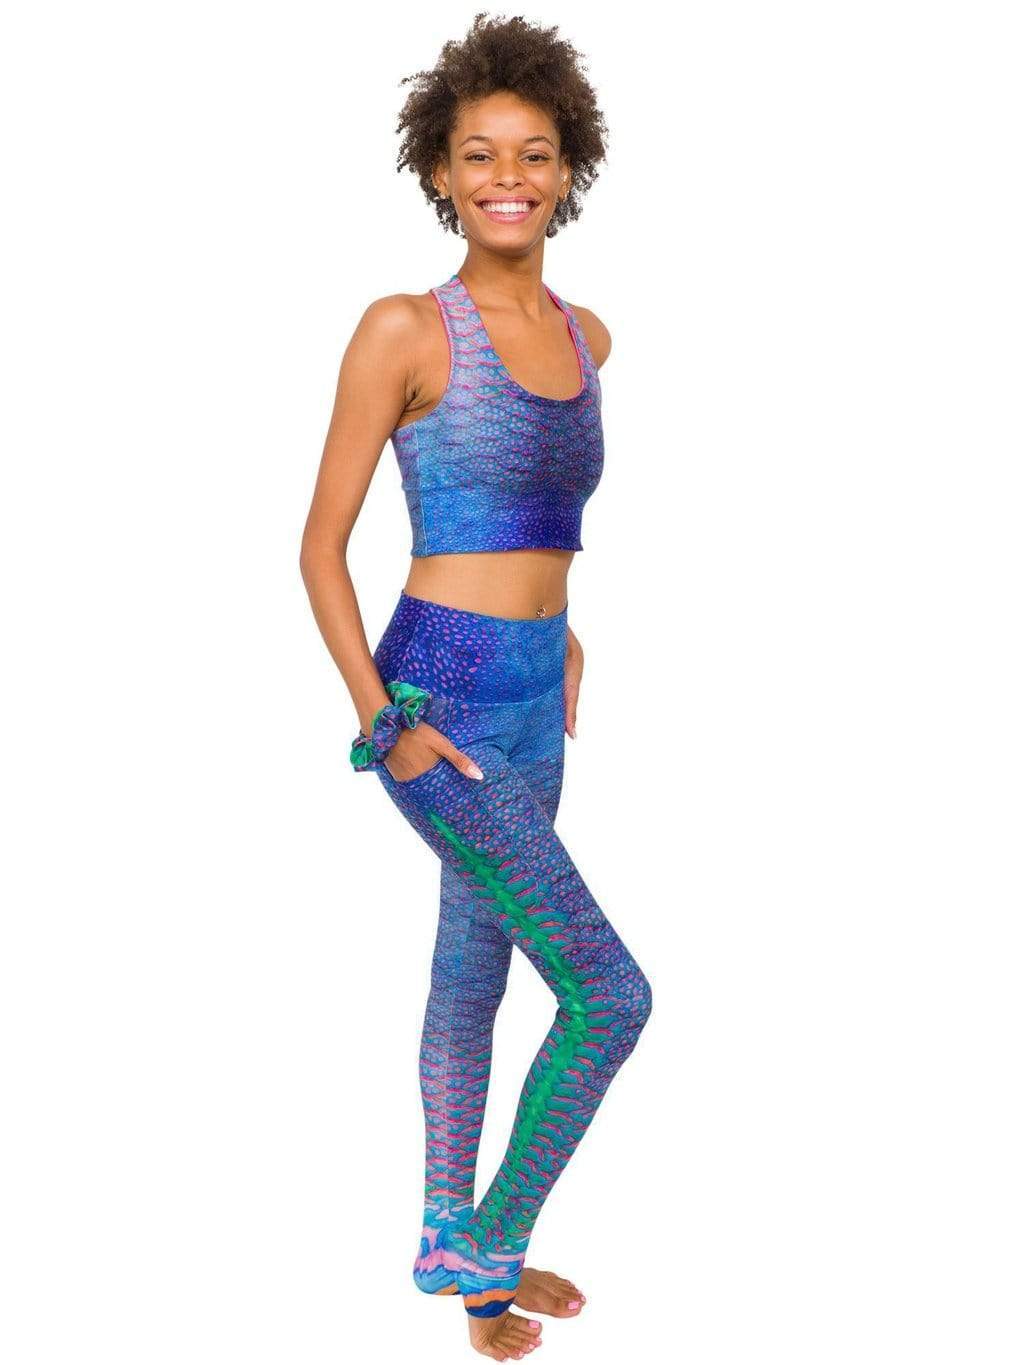 Model: Syriah is a sea turtle conservation biologist. She is 5&#39;7&quot;, 111 lbs and is wearing an XS legging and top.